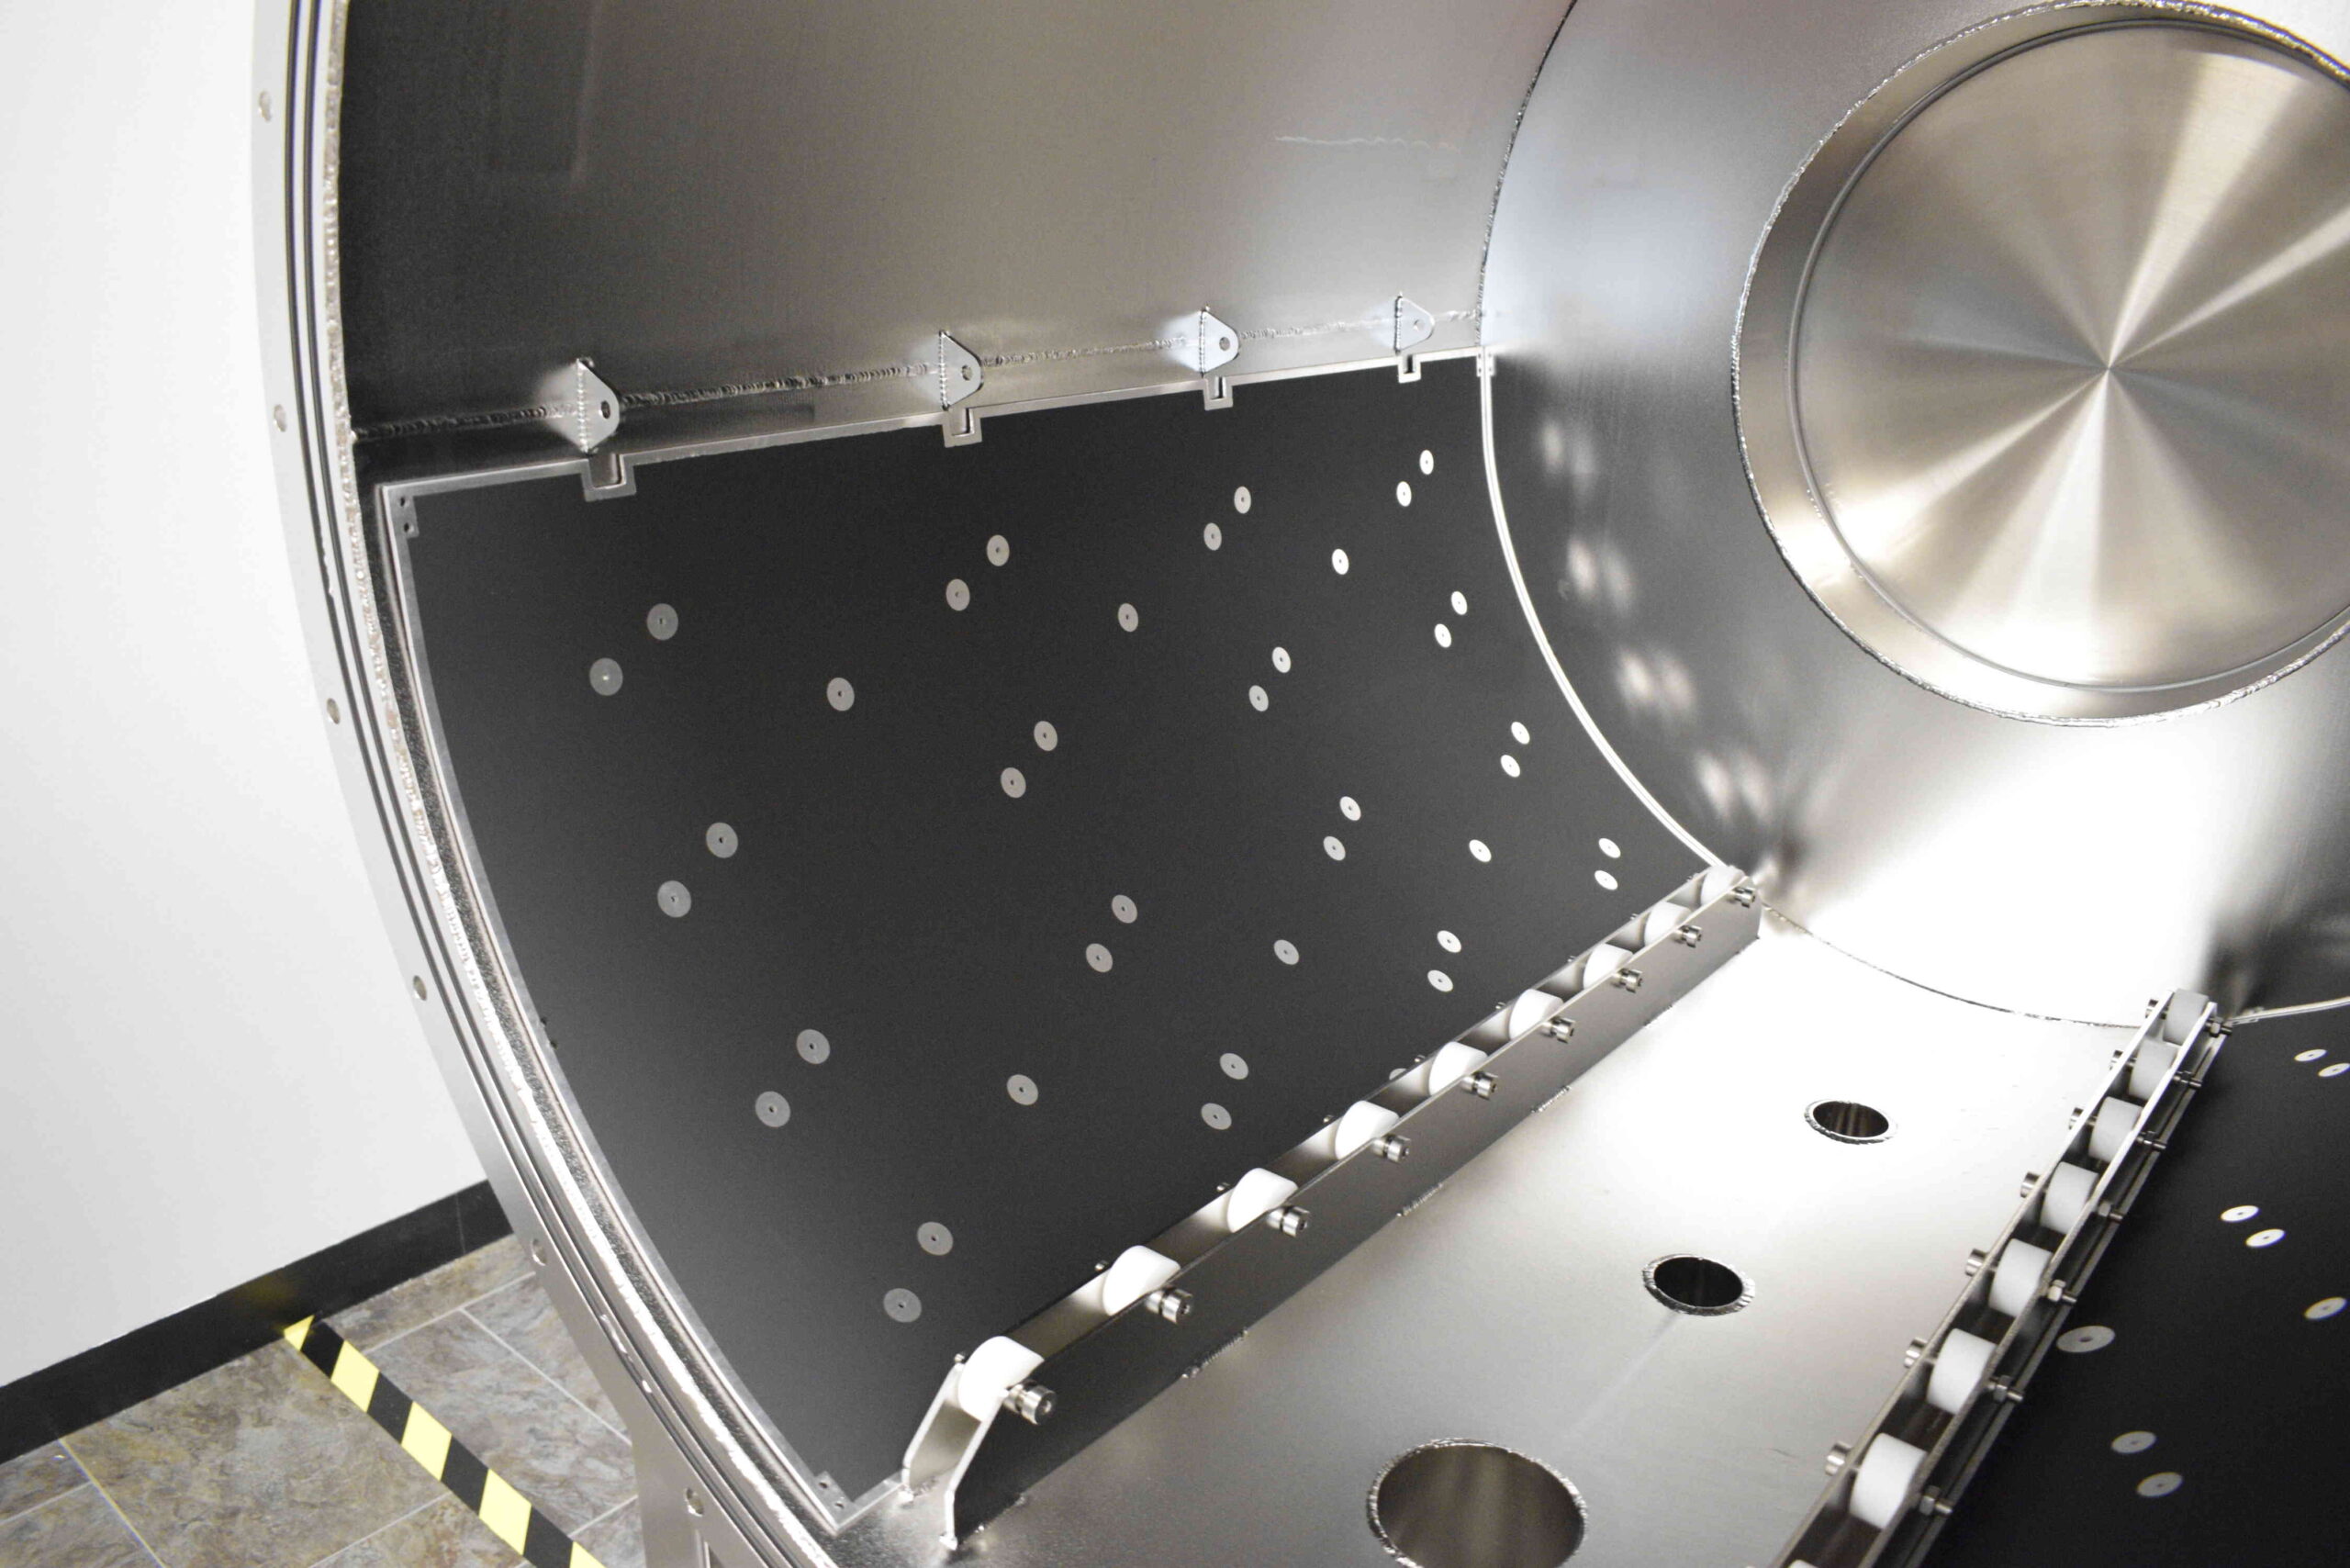 Independent shrouds in thermal vacuum chamber